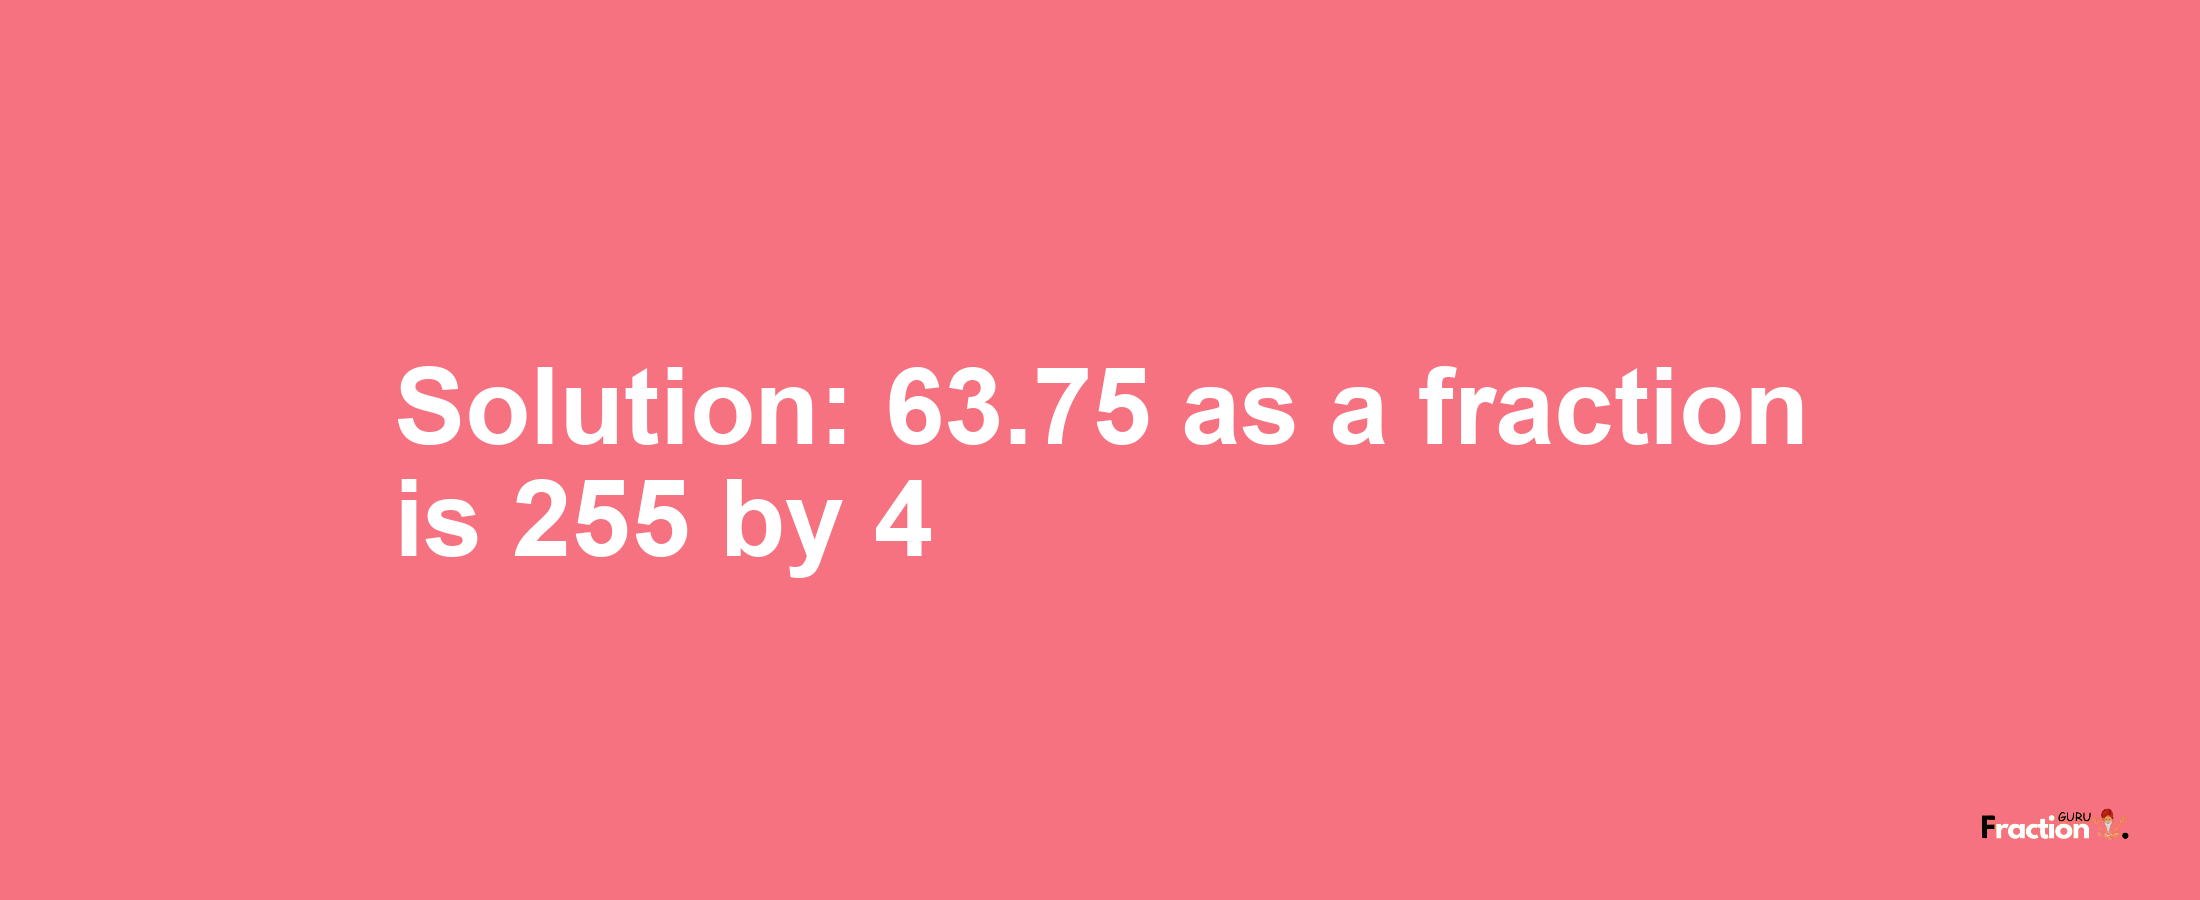 Solution:63.75 as a fraction is 255/4